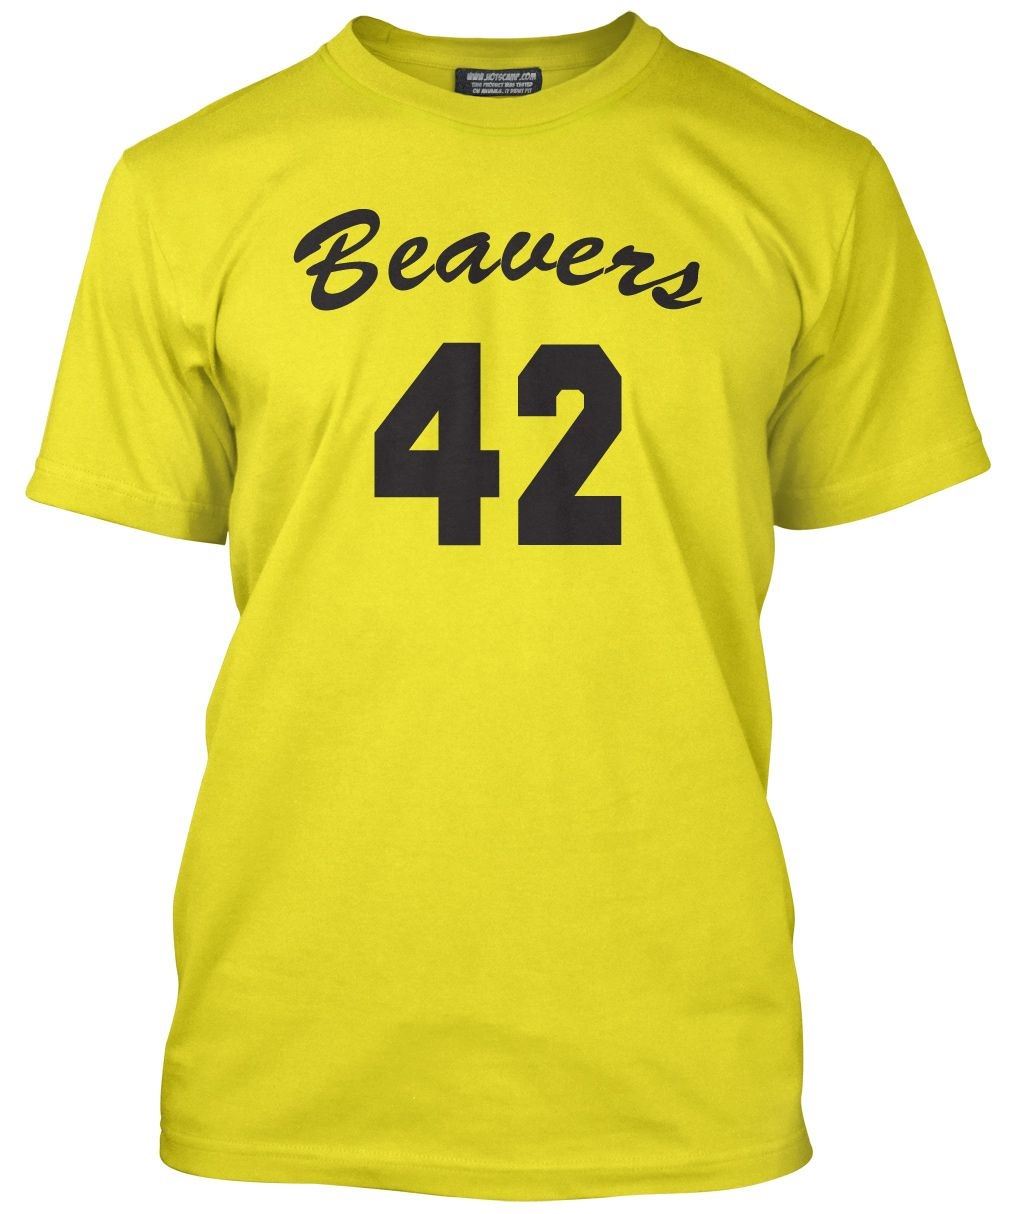 Team Wolf Beavers - Mens and Youth Unisex T-Shirt